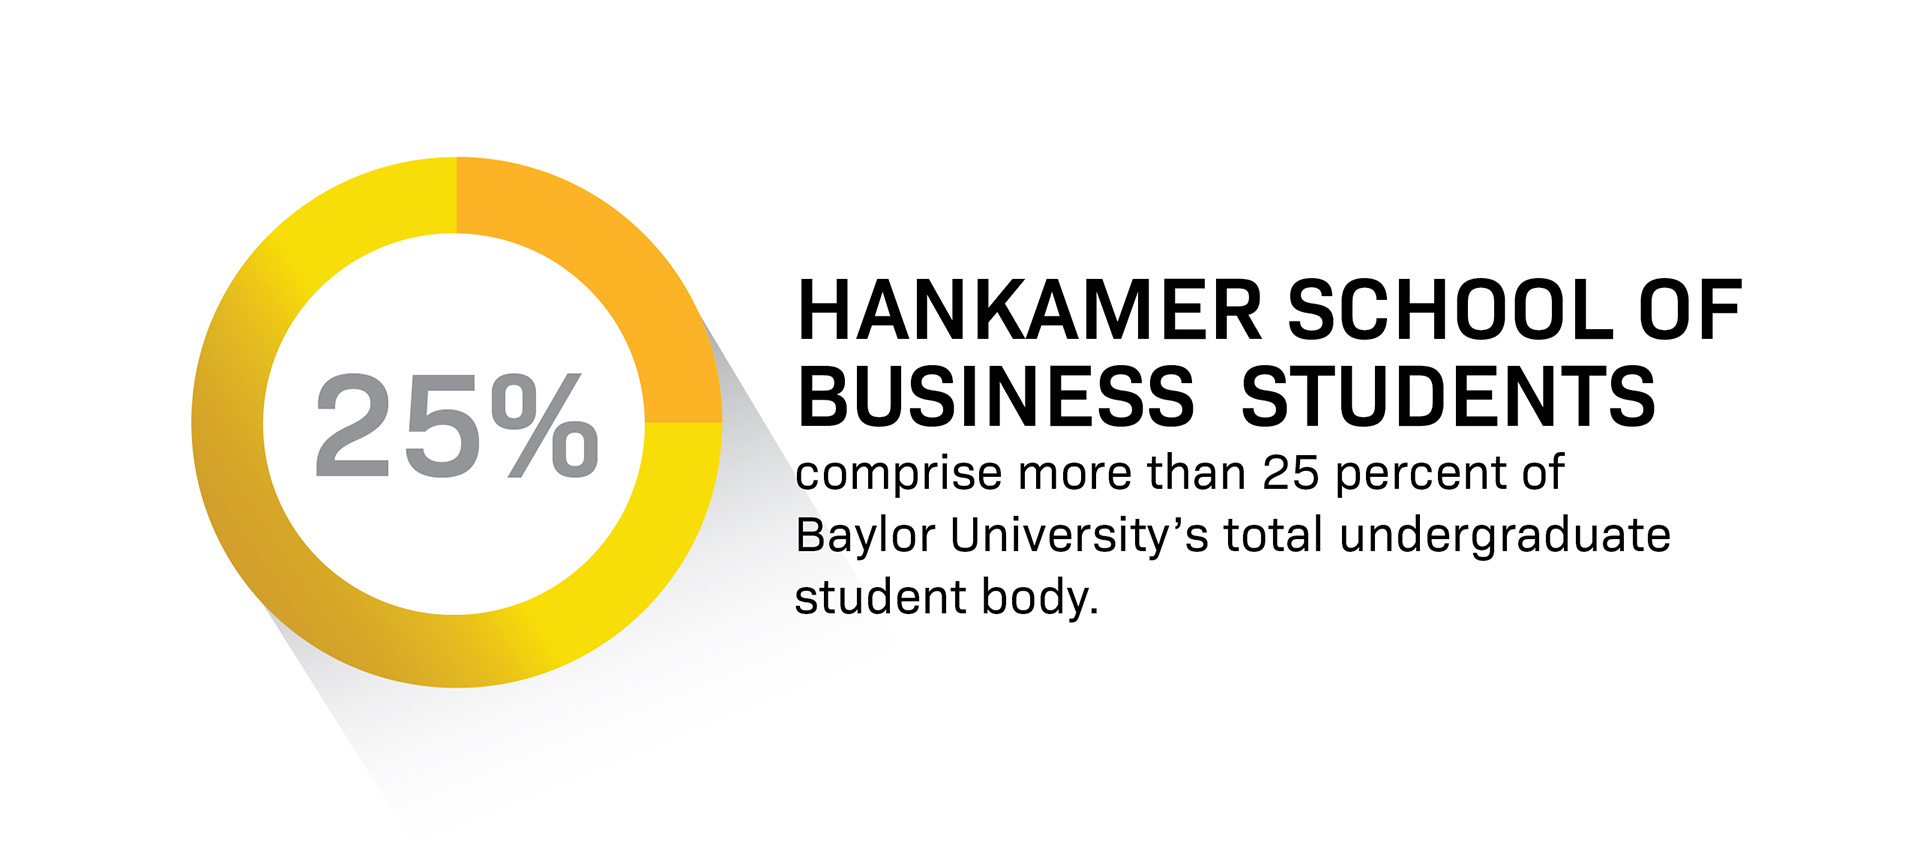 Infographic showing 25% of the Baylor student body is a Hankamer School of Business major